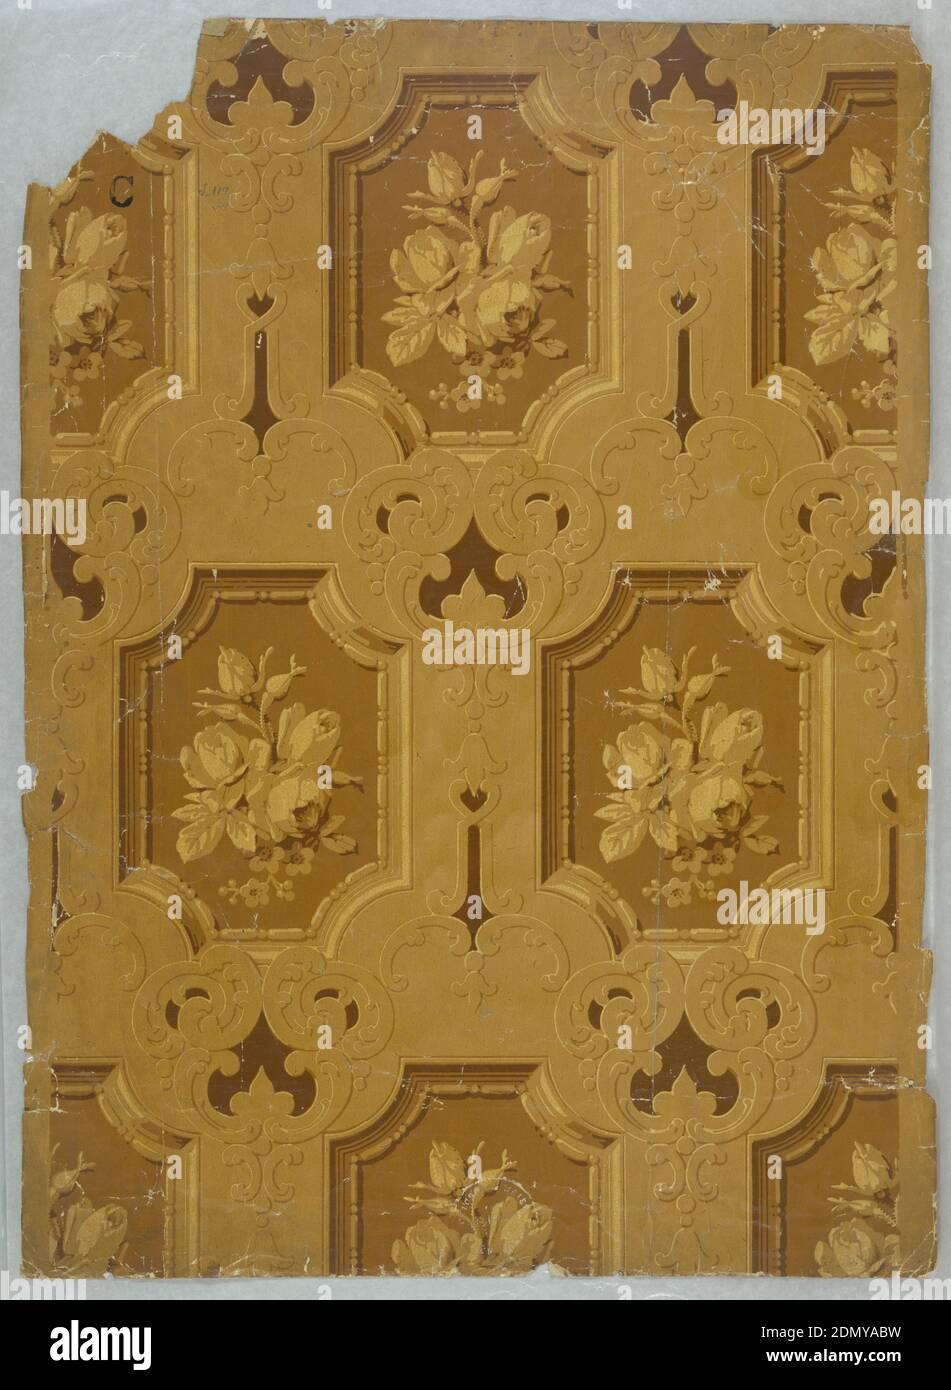 Sidewall, Block-printed and glazed, Glossy-finished paper in browns, with scroll-work, and simulated inset panels with enframed bunches of roses., England or France, 1860–70, Wallcoverings, Sidewall Stock Photo